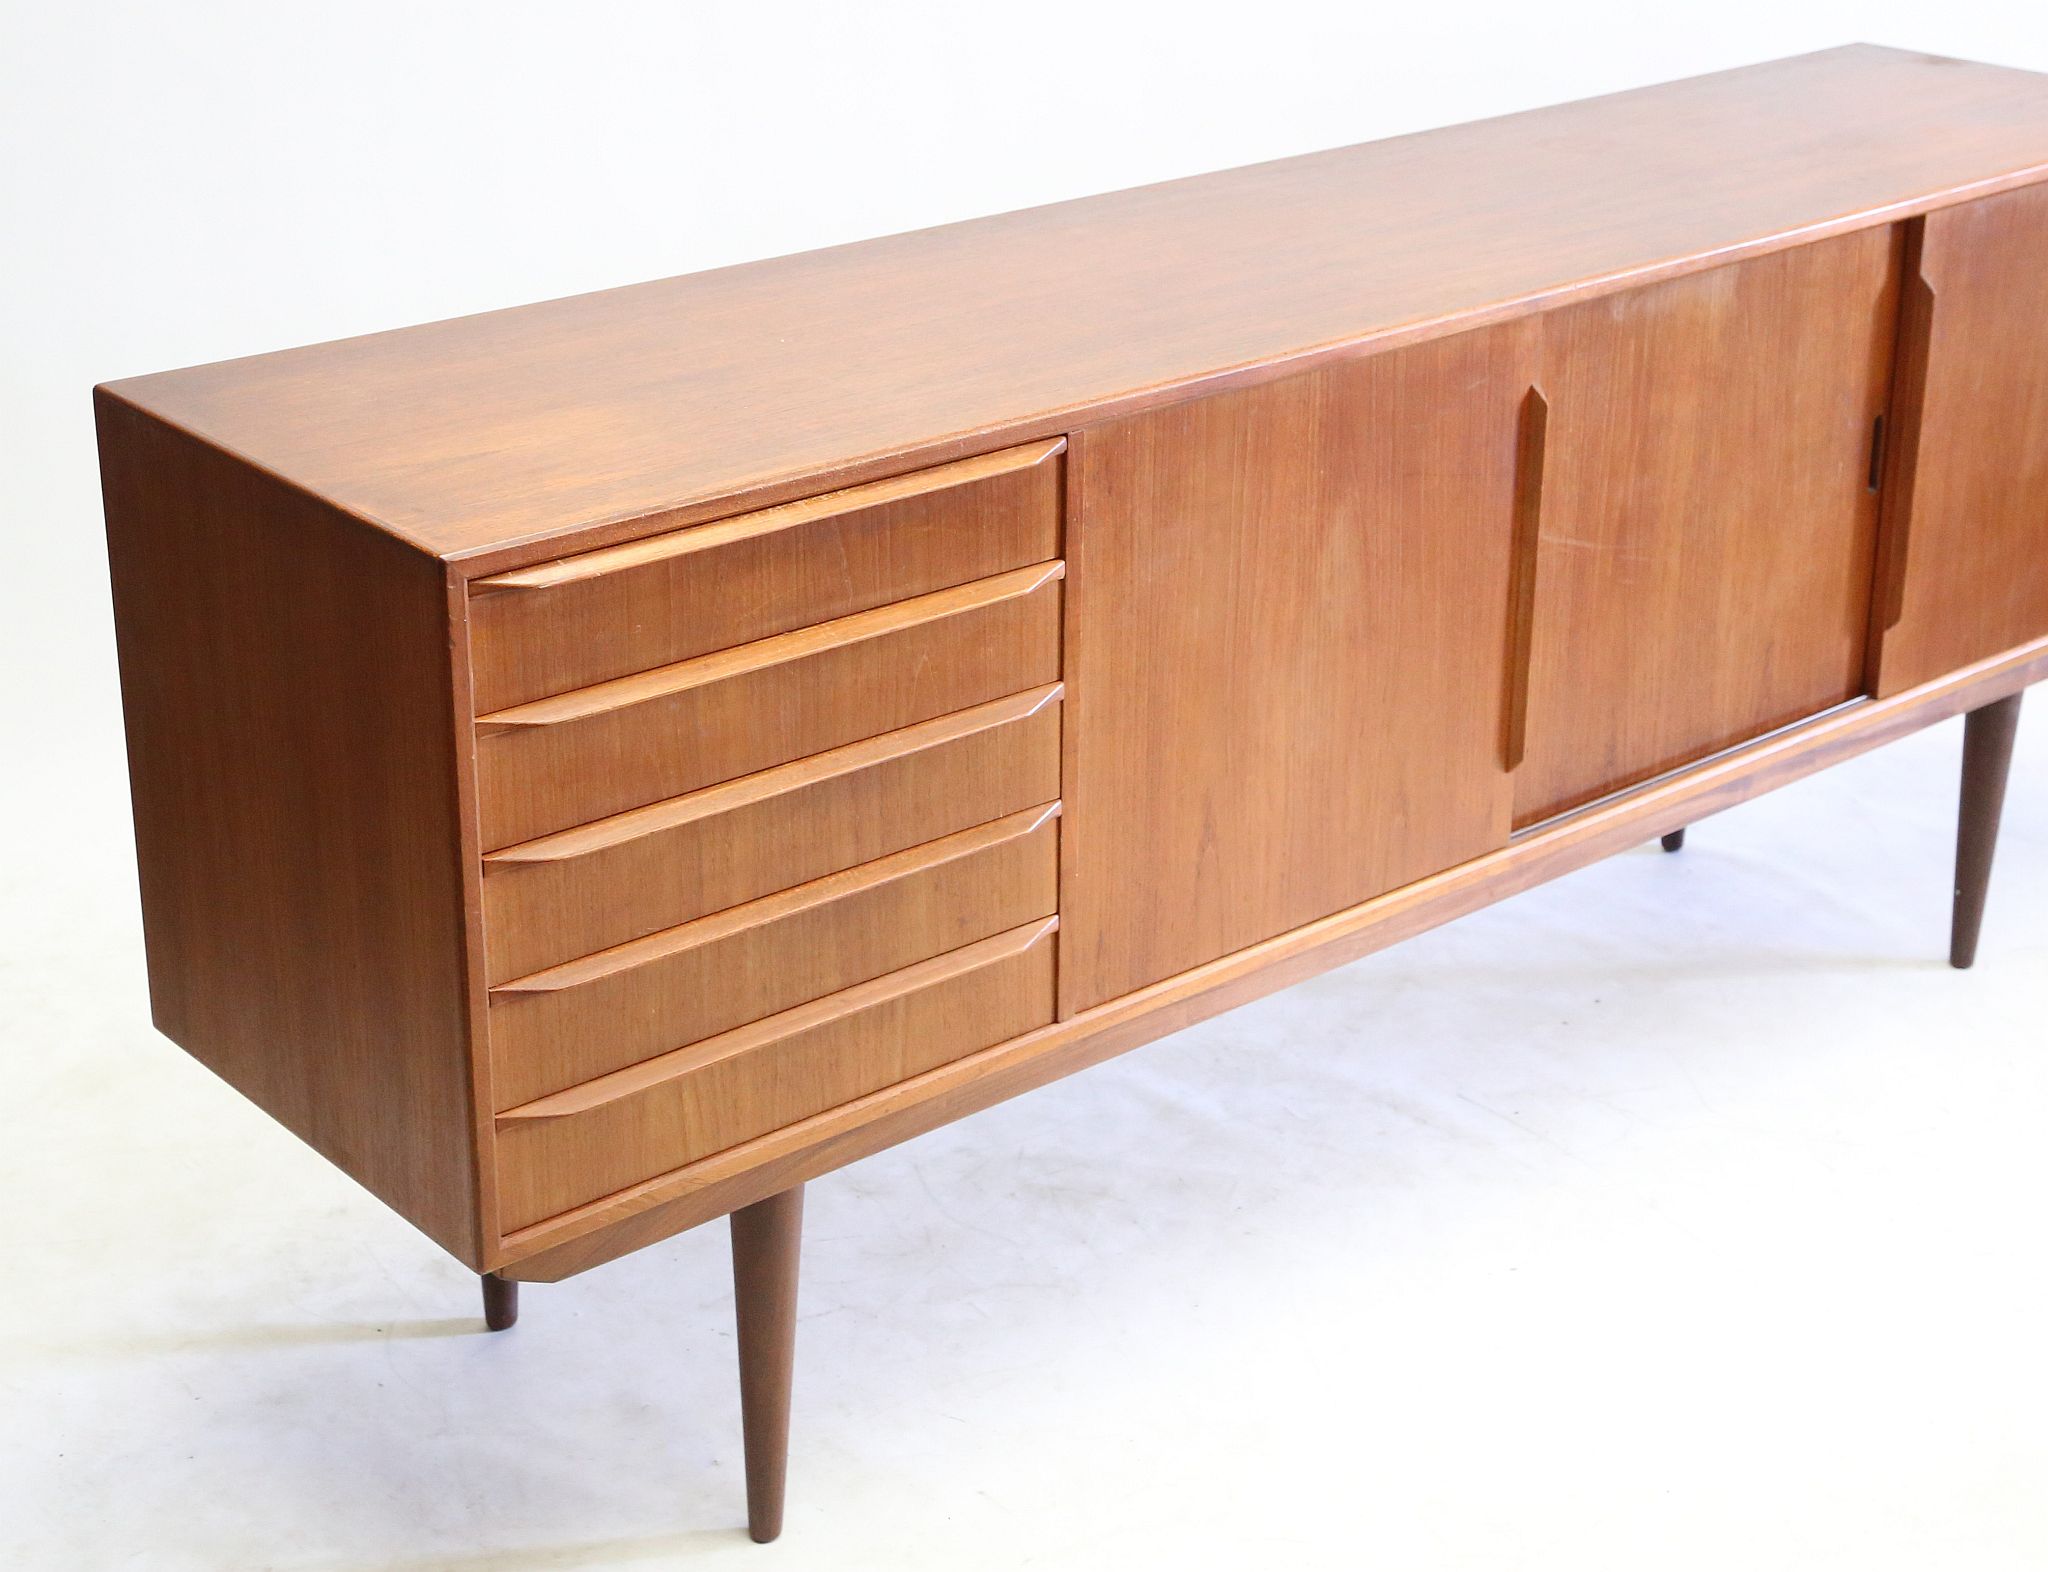 A DANISH 1960s TEAK SIDEBOARD, attributed to Svend - Image 8 of 10